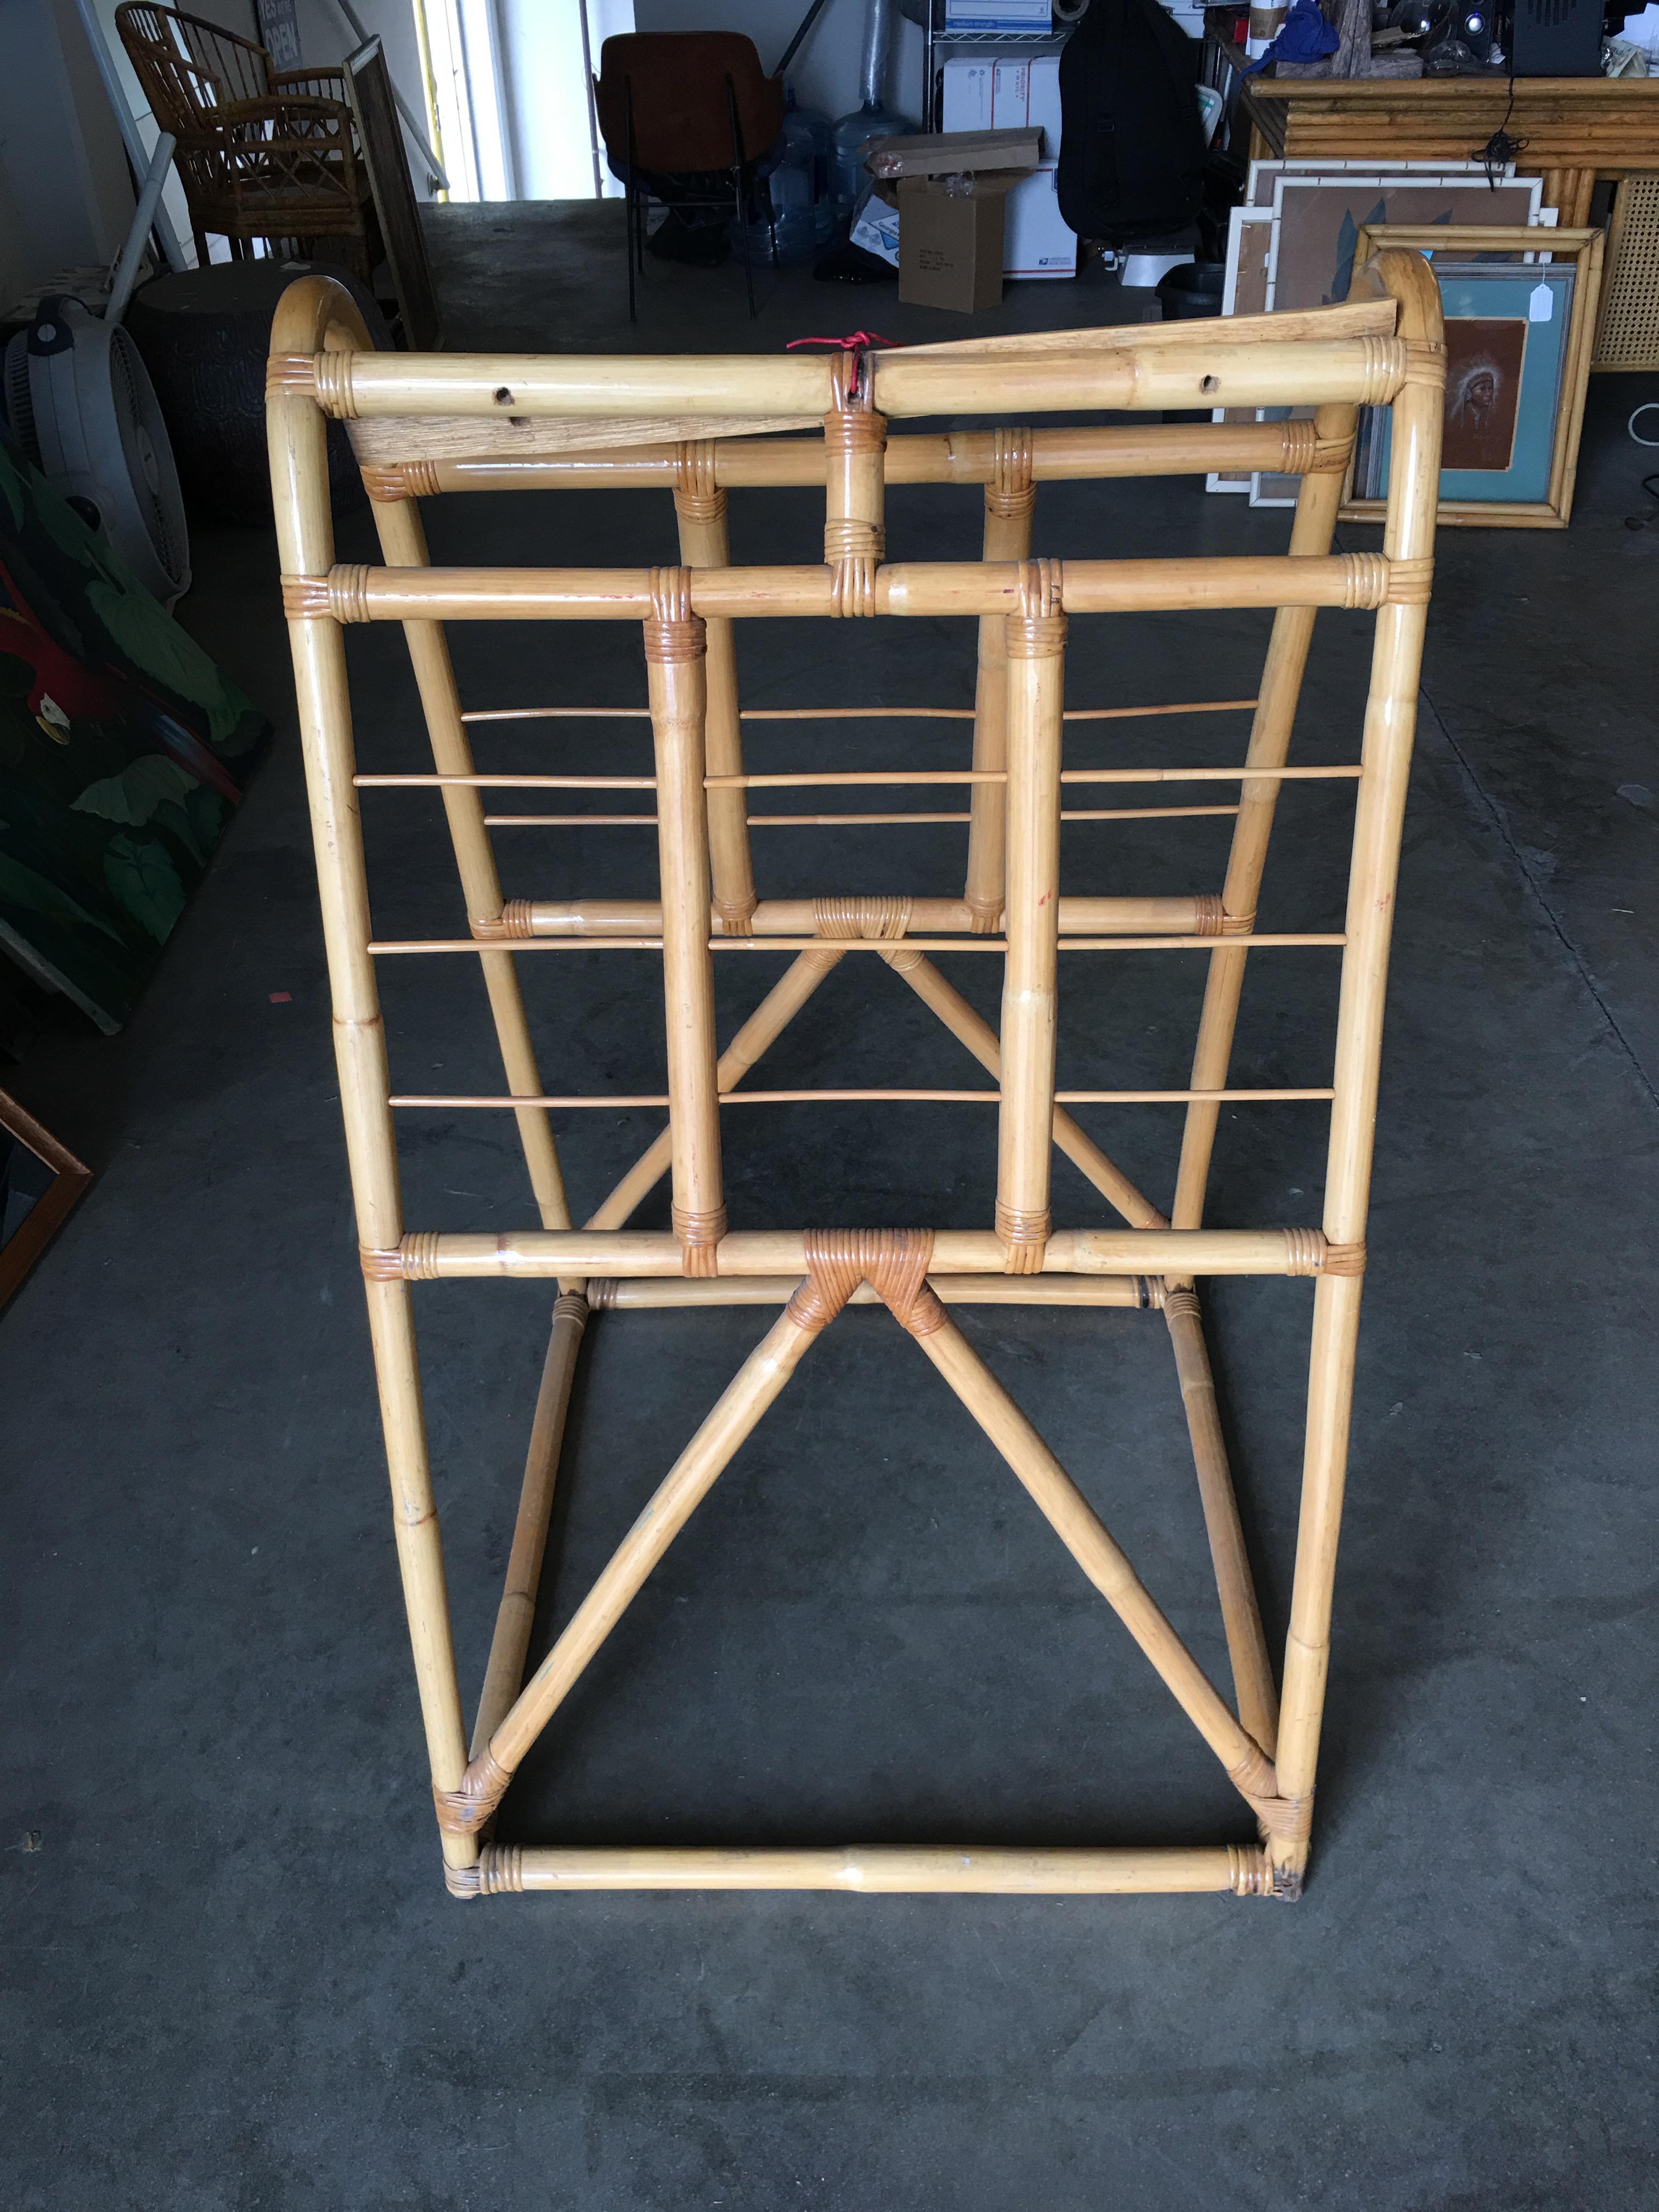 amish wooden clothes drying rack plans